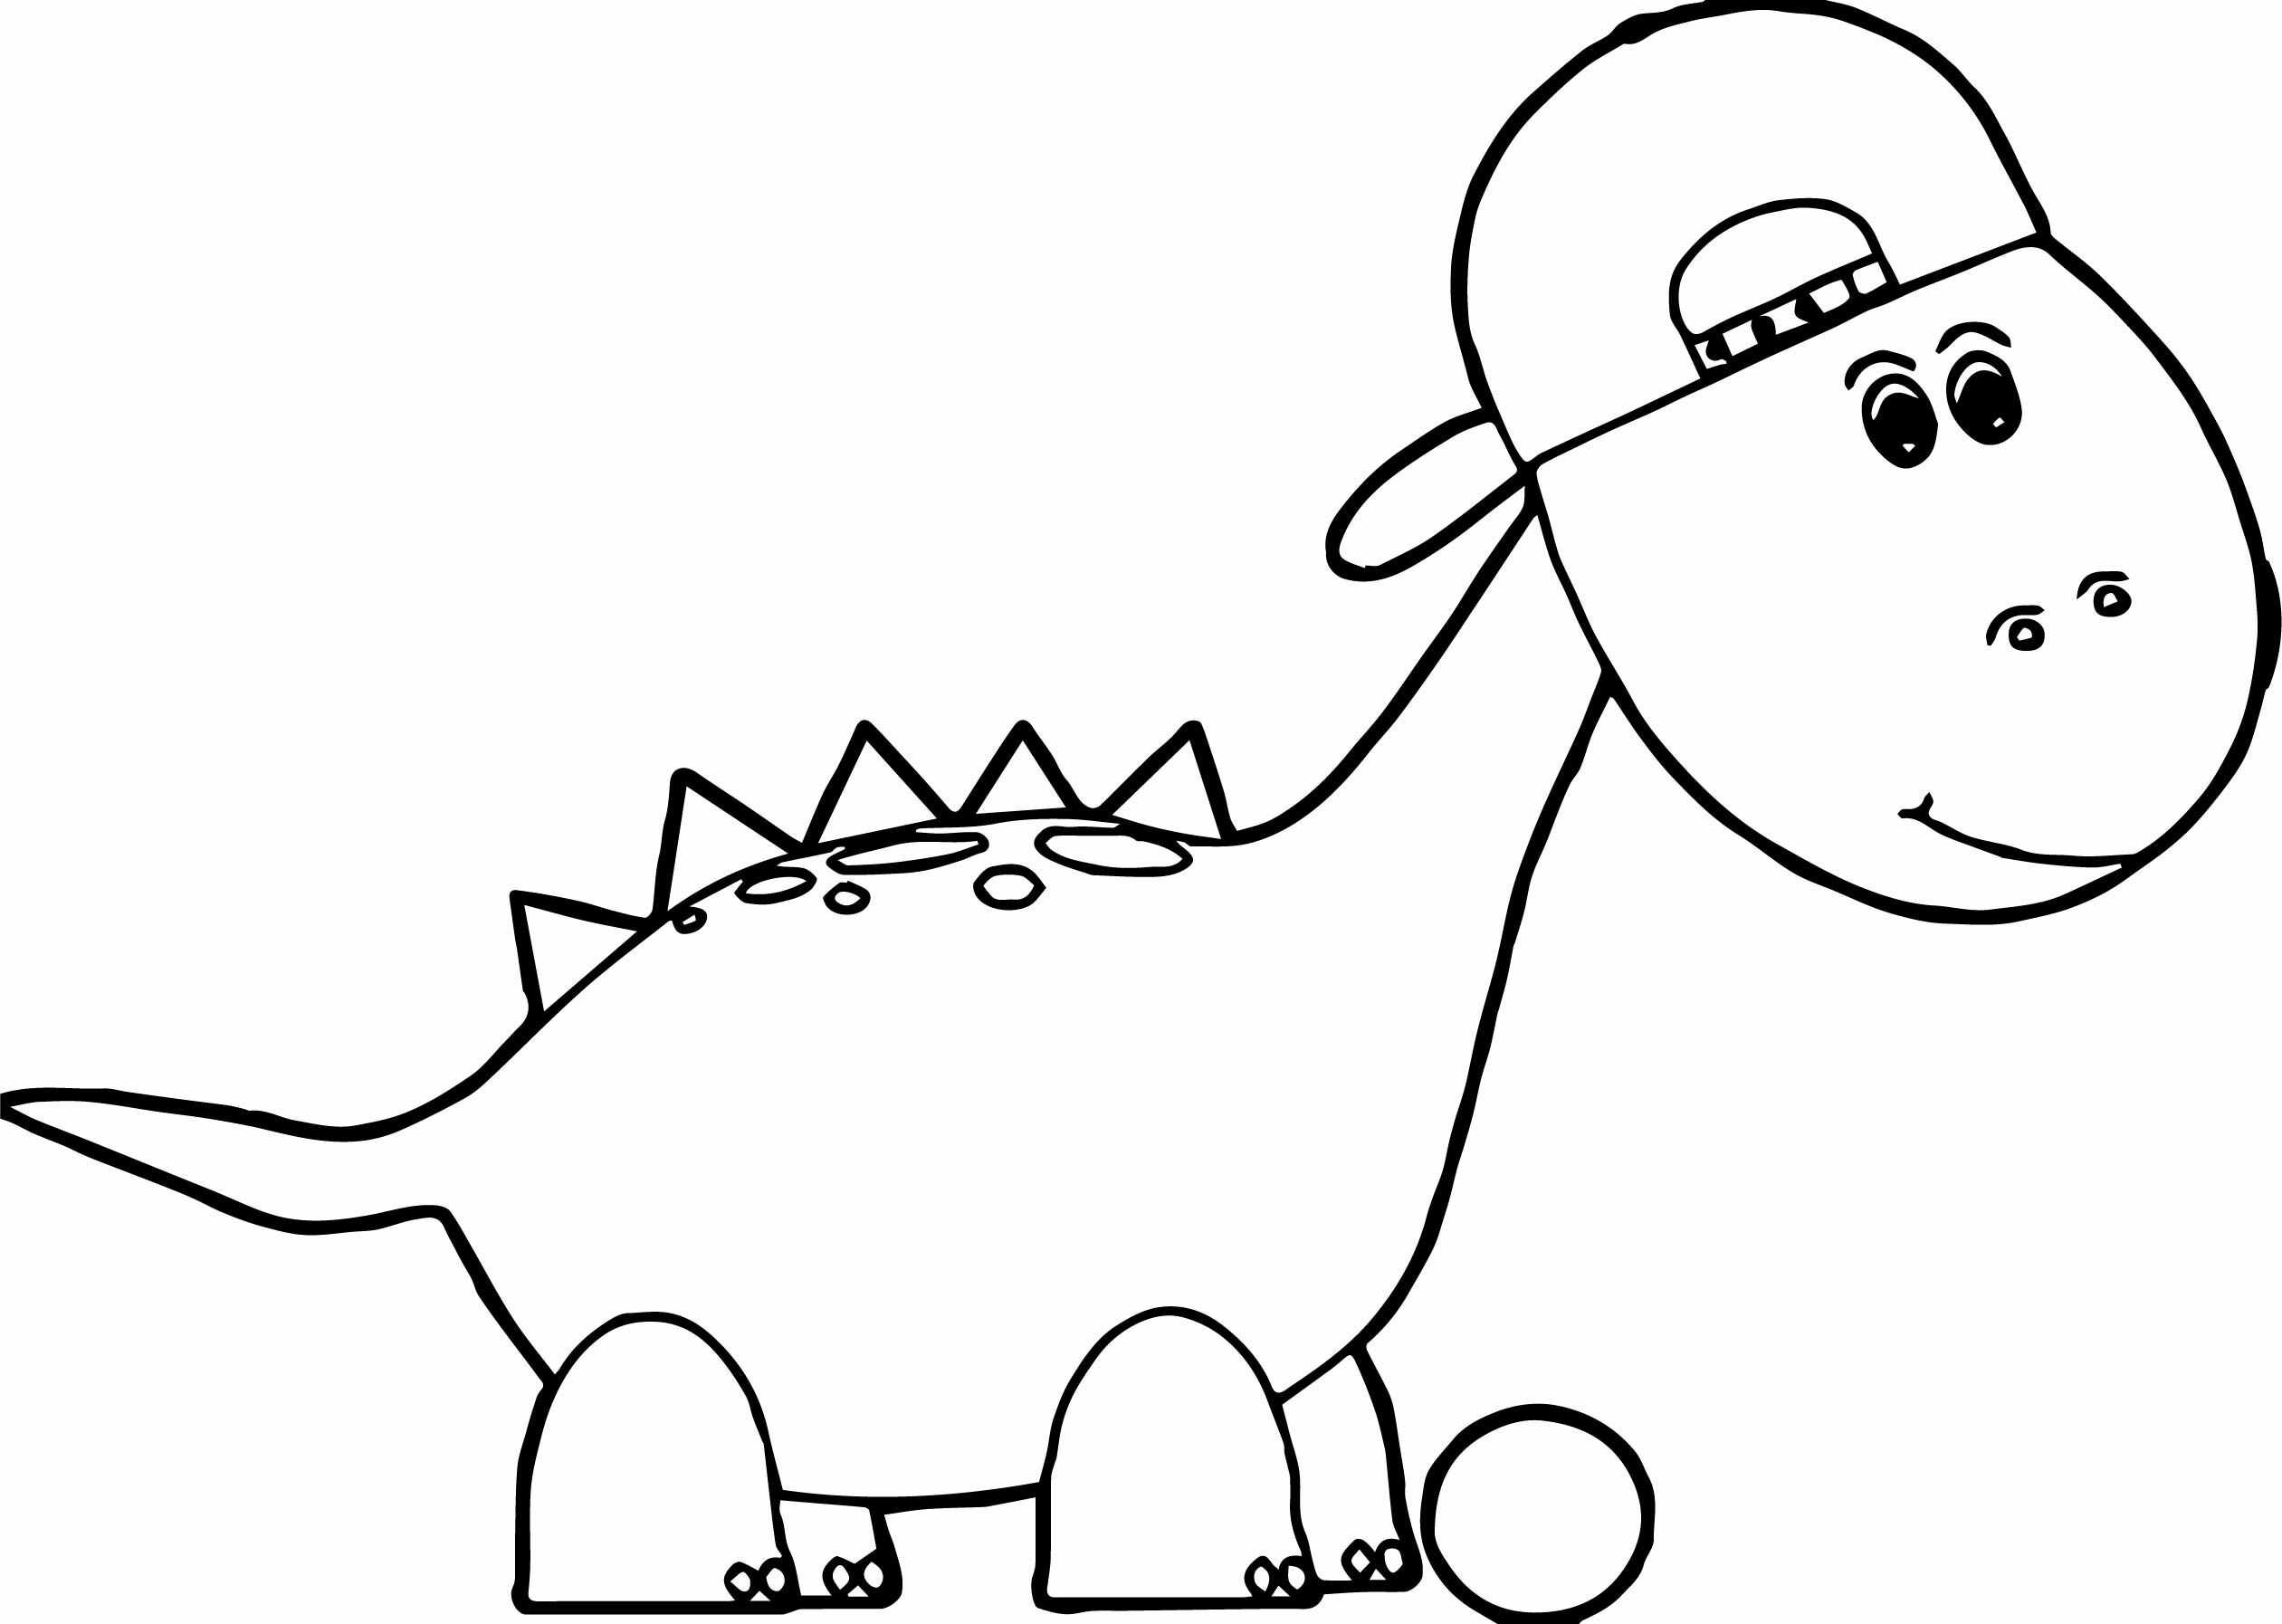 Cute Dinosaur Wearing A Cap Coloring Pages